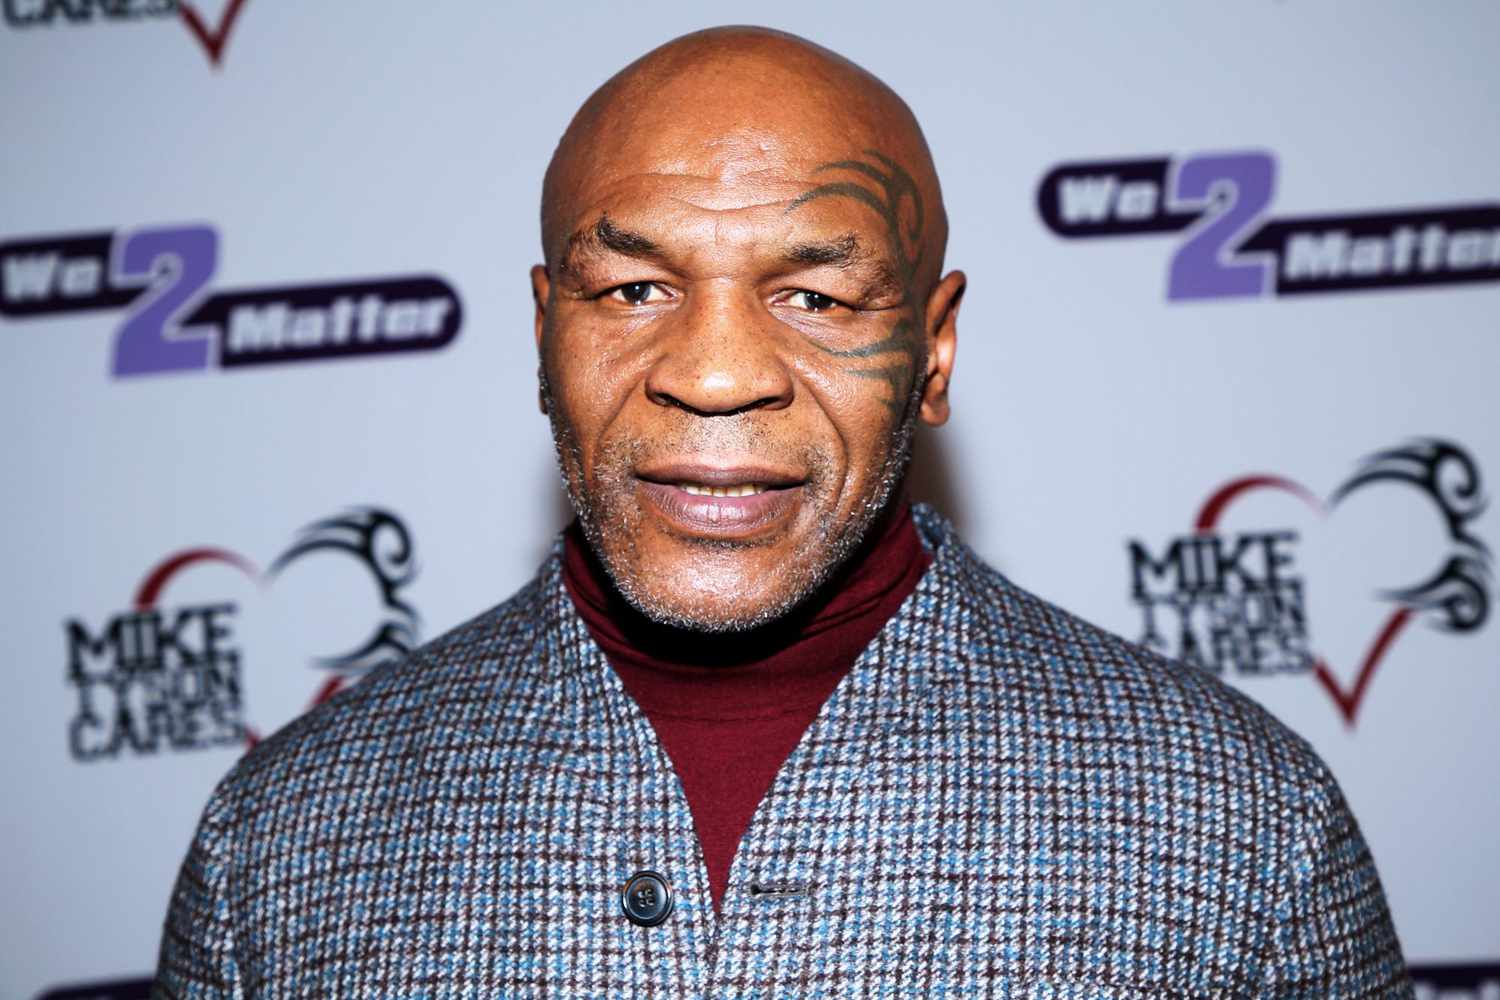 NEWPORT BEACH, CALIFORNIA - DECEMBER 05: Mike Tyson attends the Mike Tyson Cares & We 2 Matter Fundraiser on December 05, 2021 in Newport Beach, California. (Photo by Phillip Faraone/Getty Images)